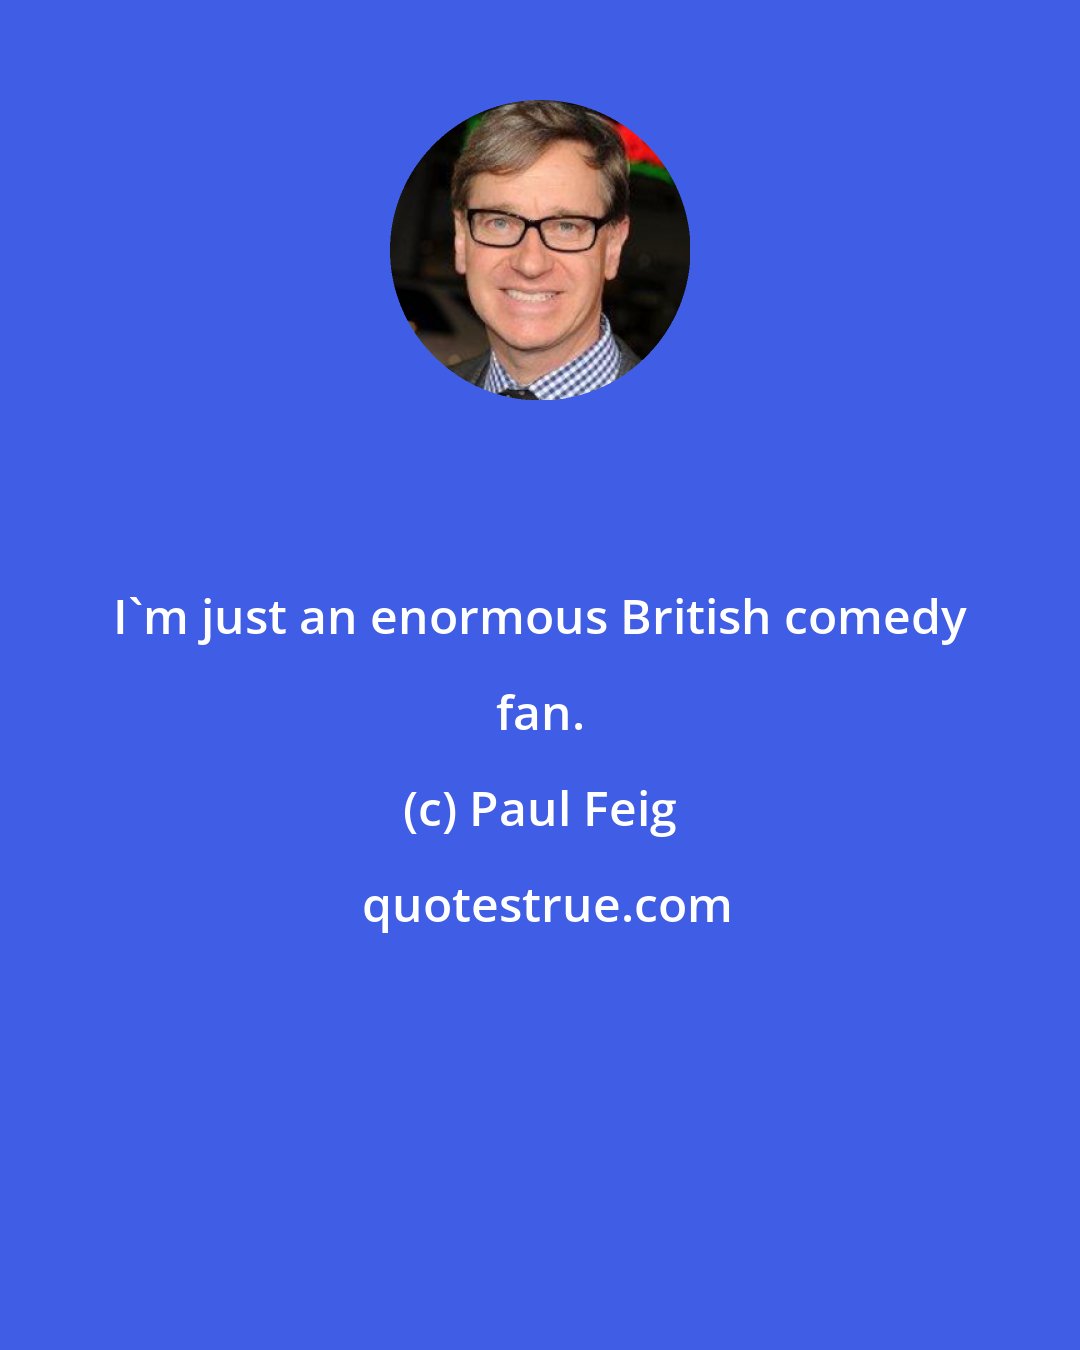 Paul Feig: I'm just an enormous British comedy fan.